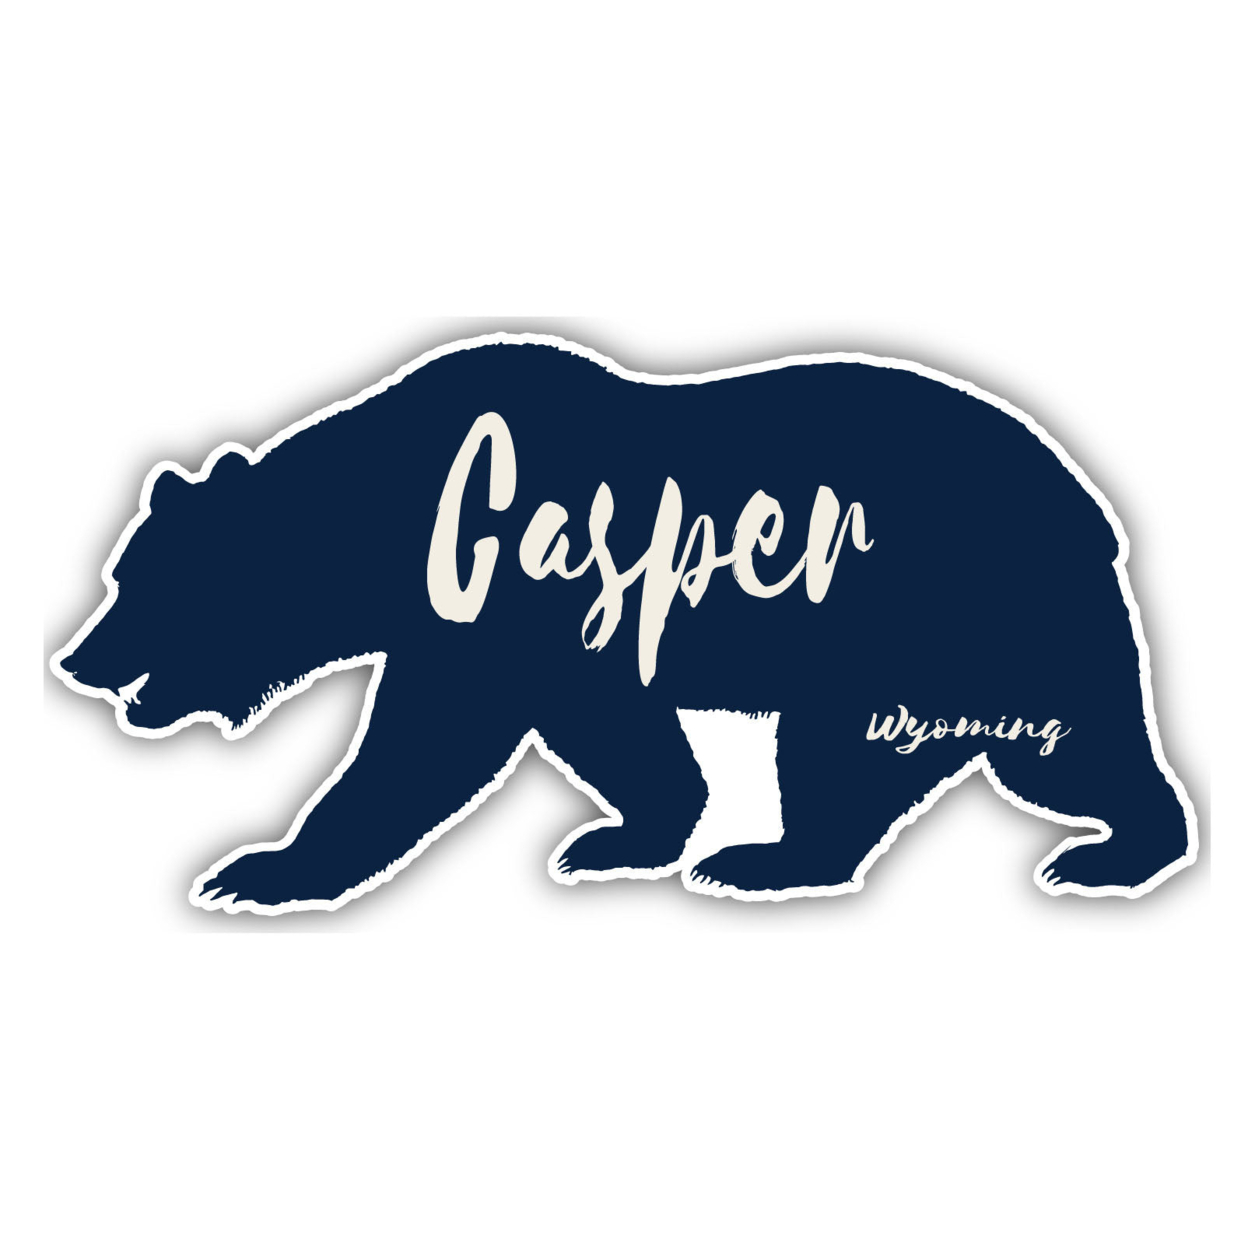 Casper Wyoming Souvenir Decorative Stickers (Choose Theme And Size) - 4-Pack, 12-Inch, Bear